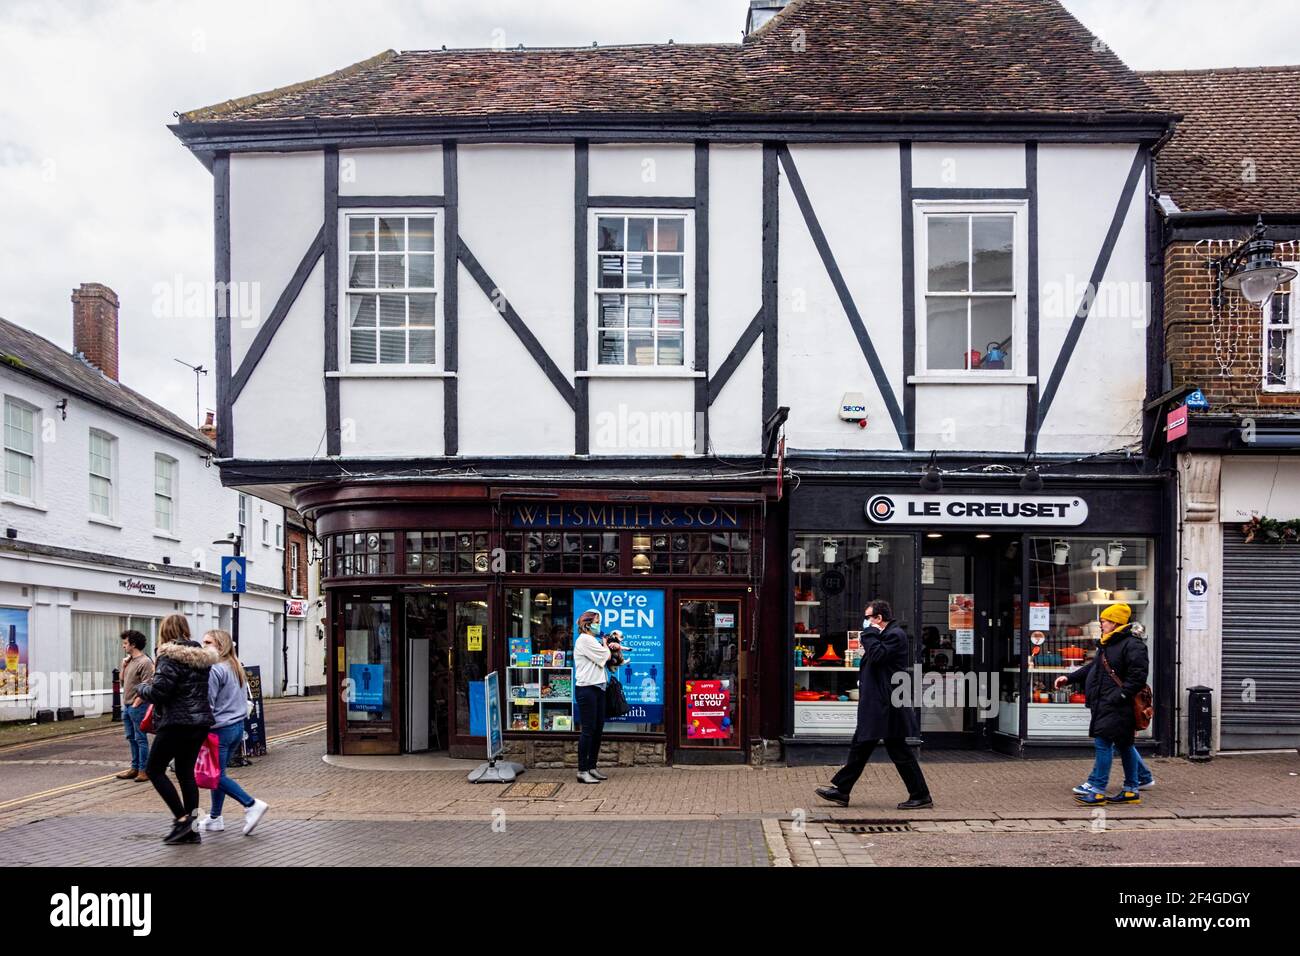 https://c8.alamy.com/comp/2F4GDGY/wh-smith-and-le-creuset-shops-market-place-st-albans-hertfordshire-uk-2F4GDGY.jpg